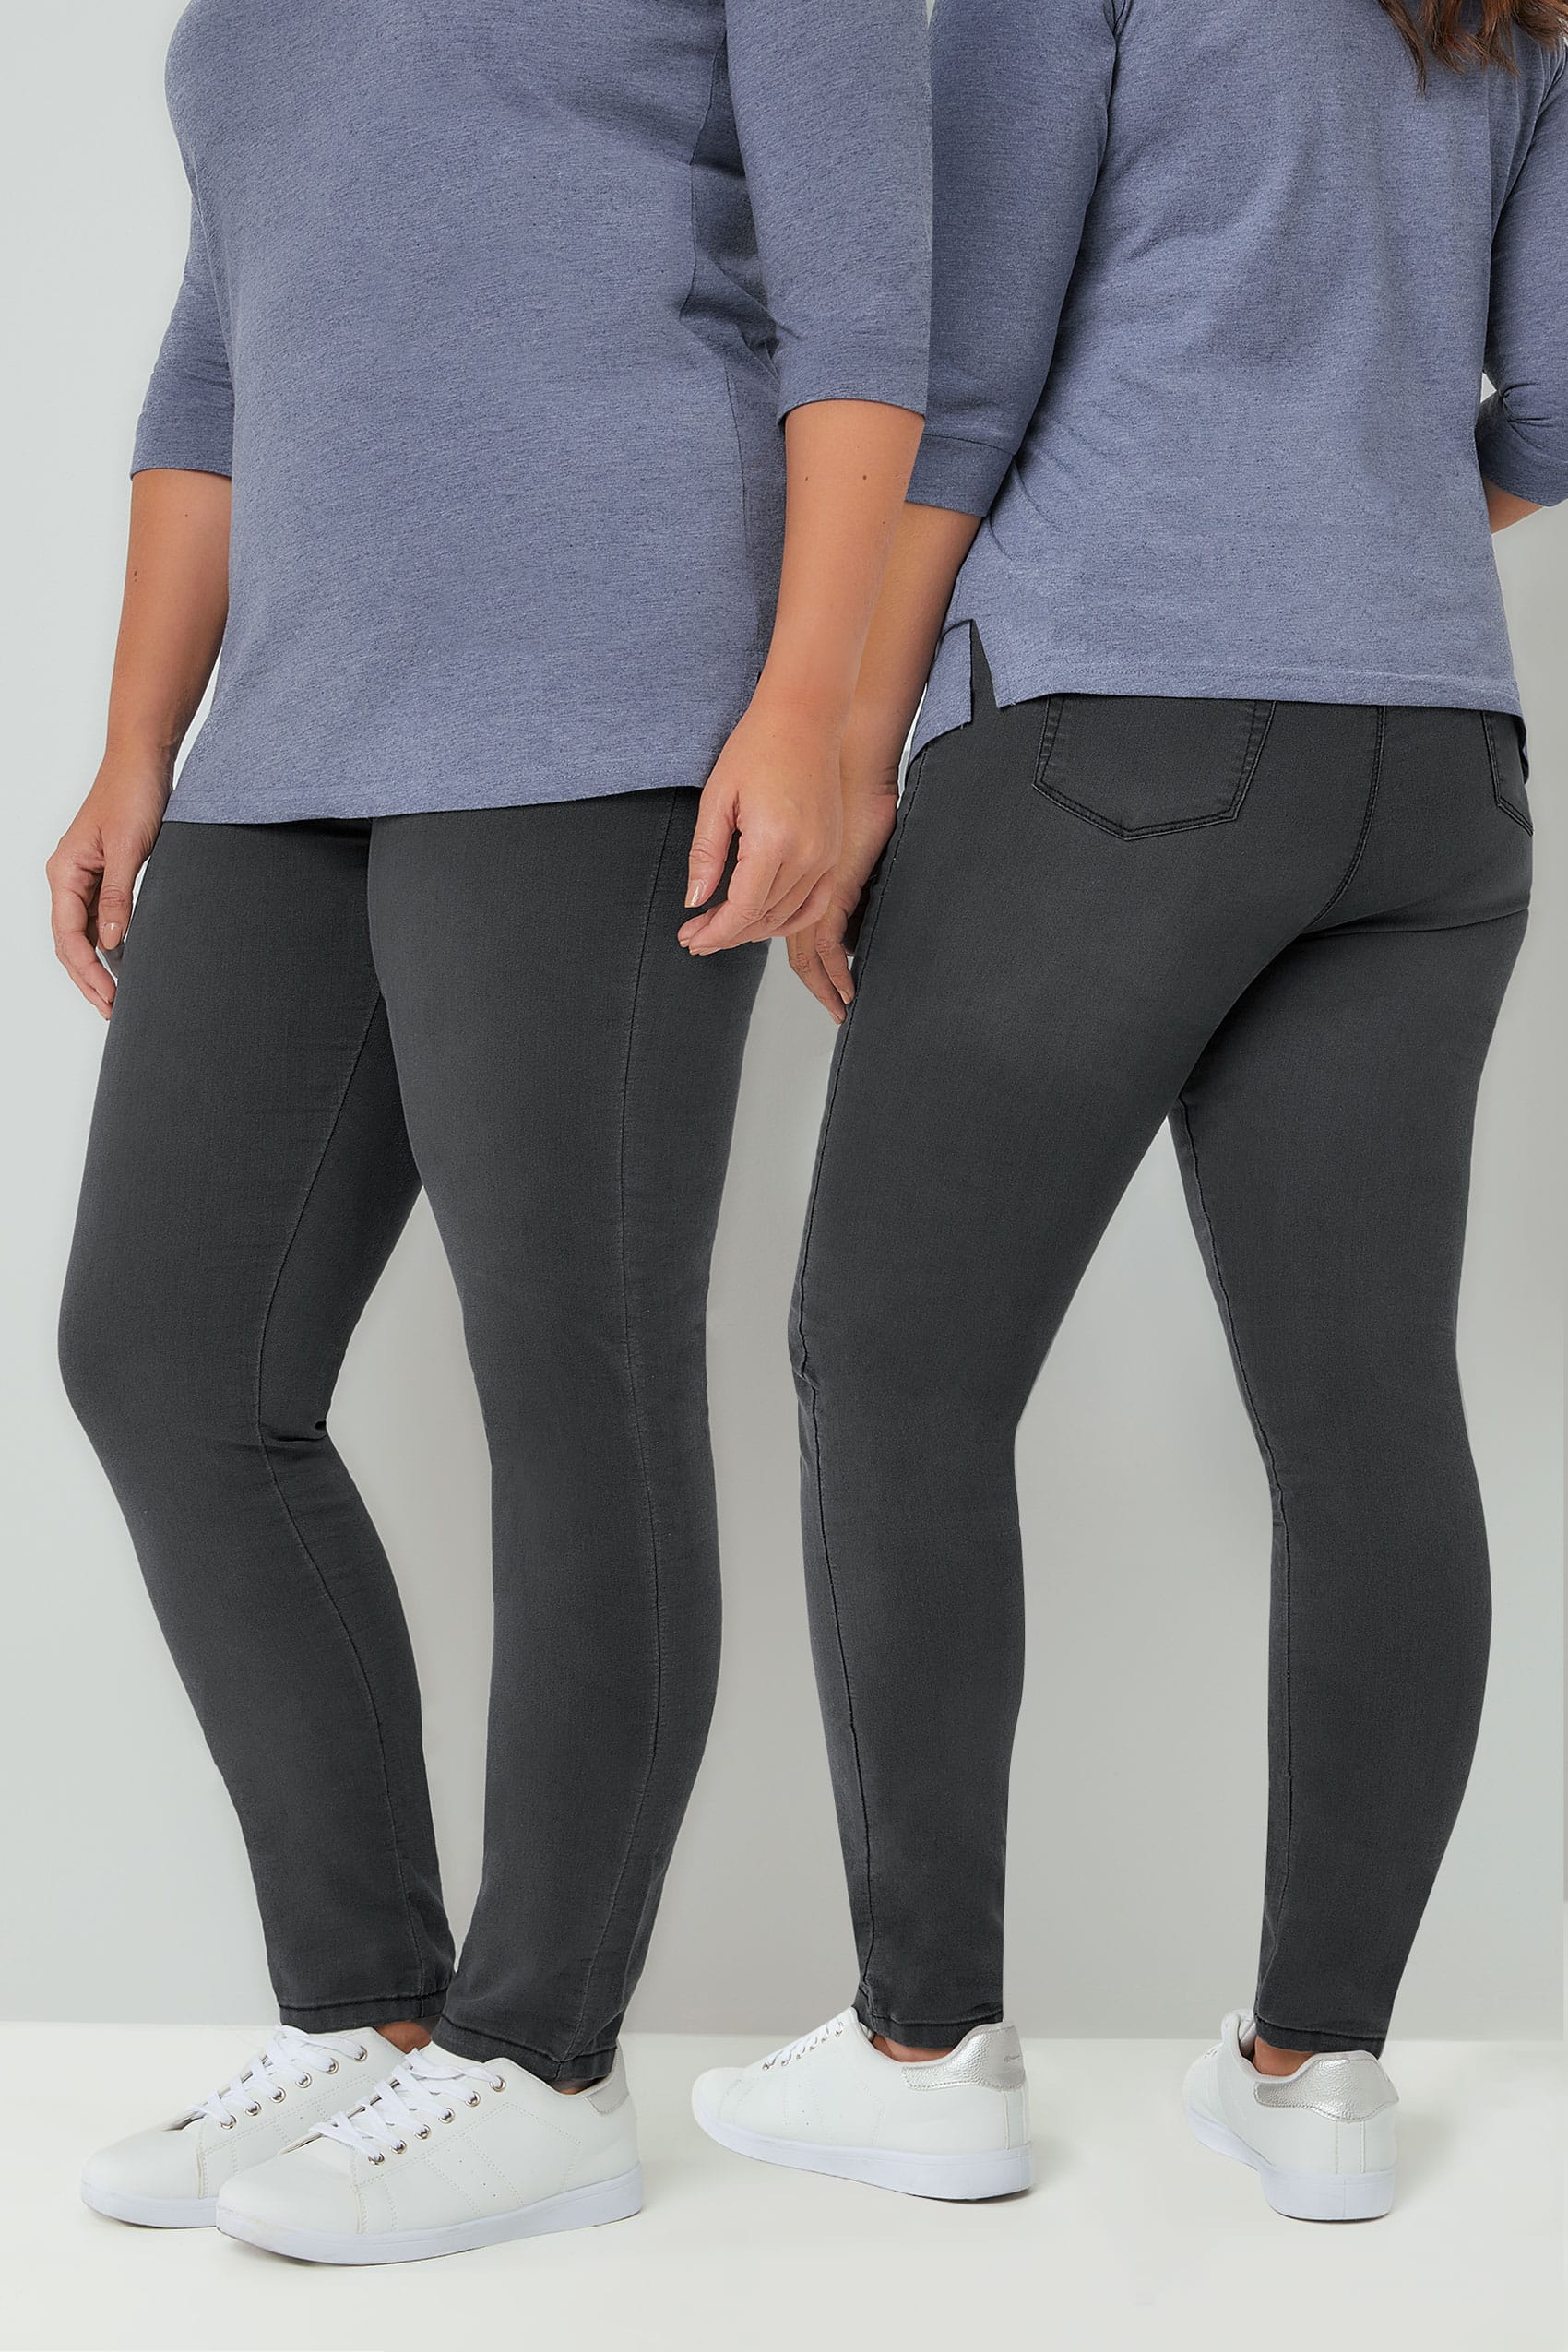 Charcoal Grey Pull On Stretch SHAPER JENNY Jeggings Plus Size 16 to 321700 x 2550